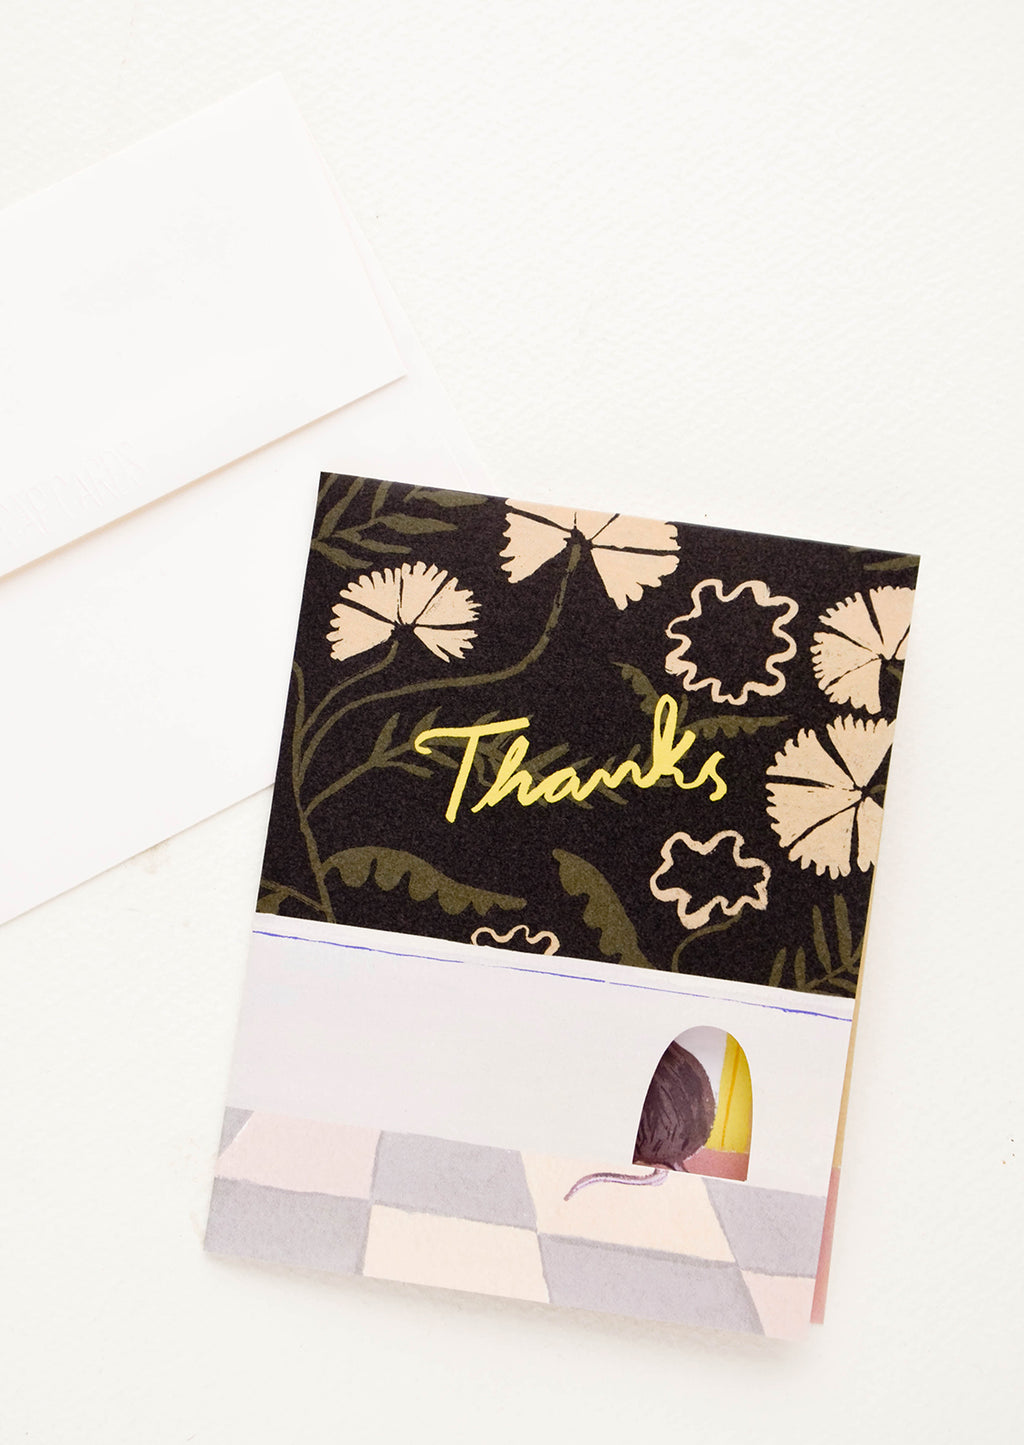 1: Greeting card with image of wall in a kitchen with a mouse hole, with "Thanks" in yellow text